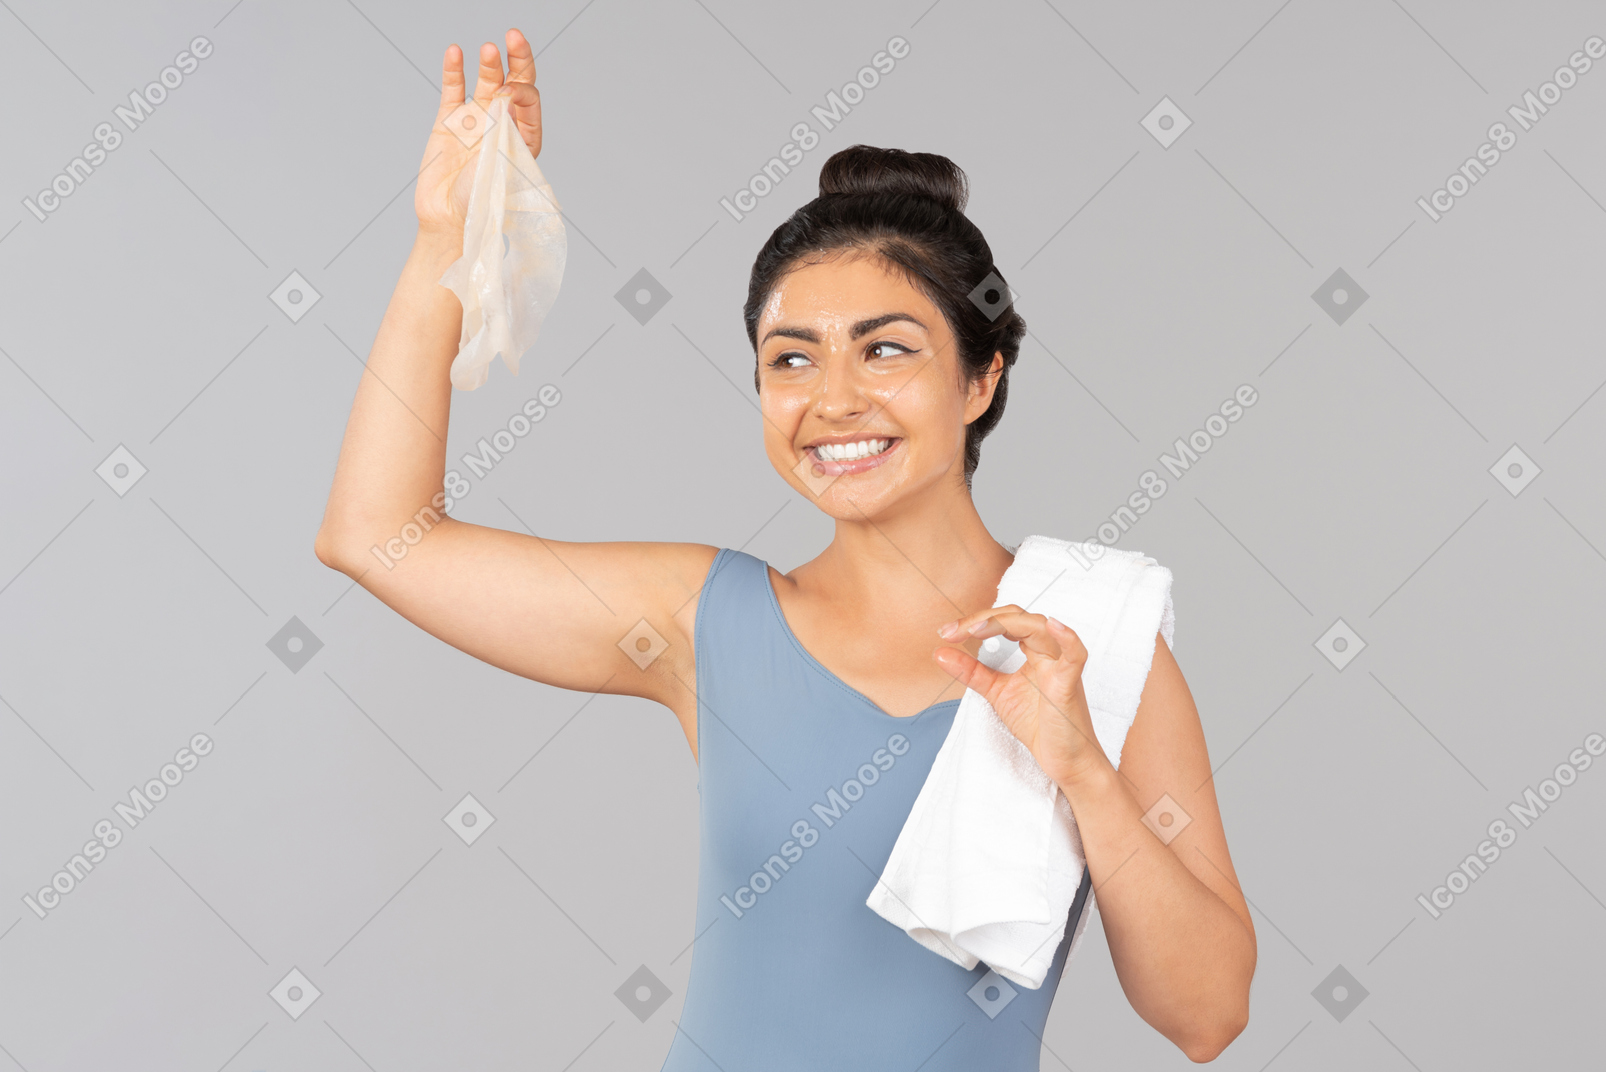 Indian woman holding face mask and white towel on shoulder